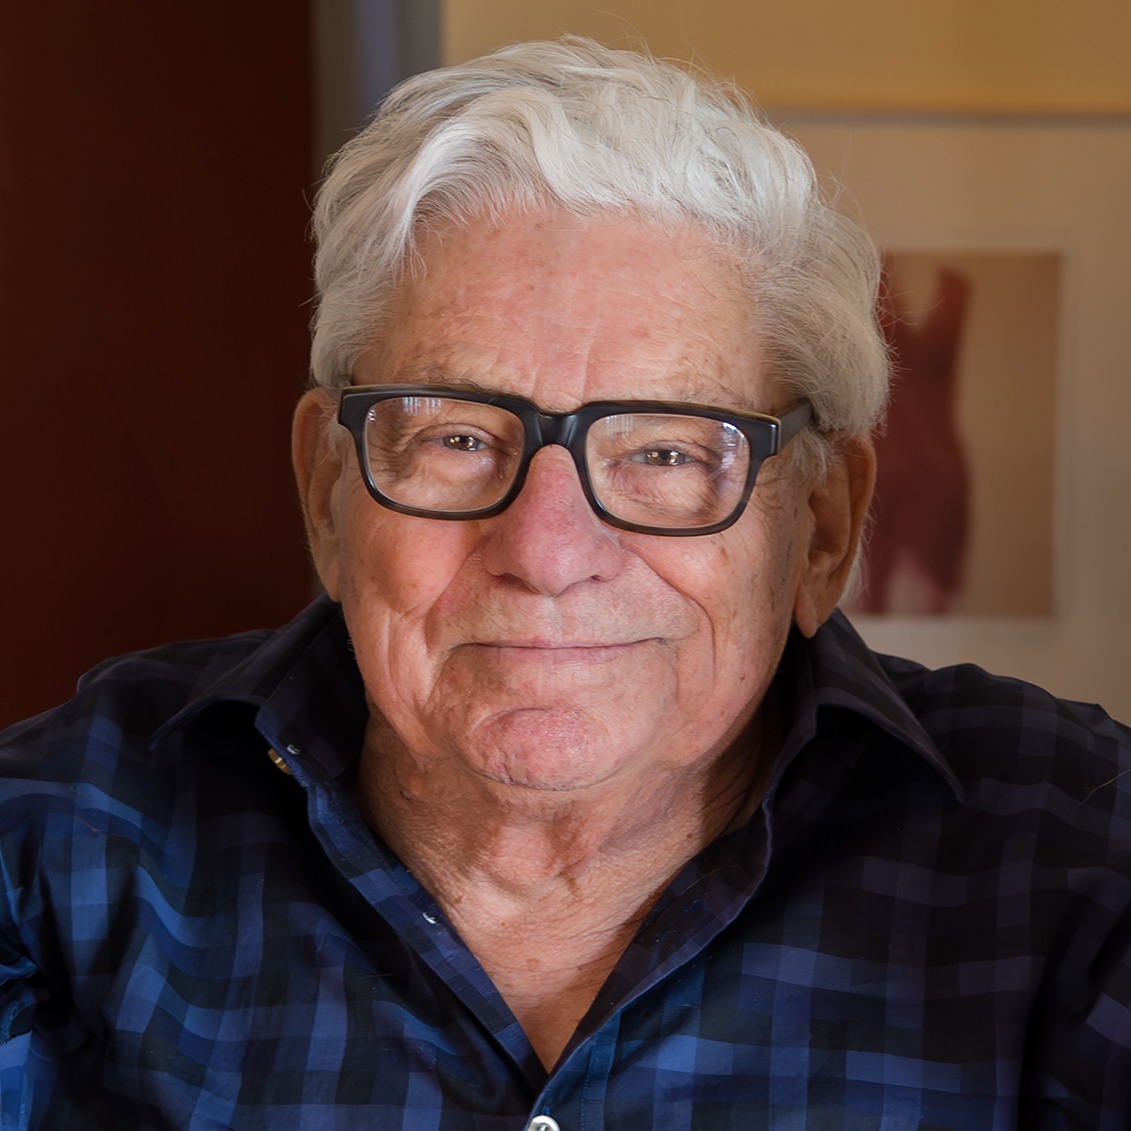 Photograph of an older man with a full head of grey hair wearing black glasses and a blue and black checkered button down shirt smiling.